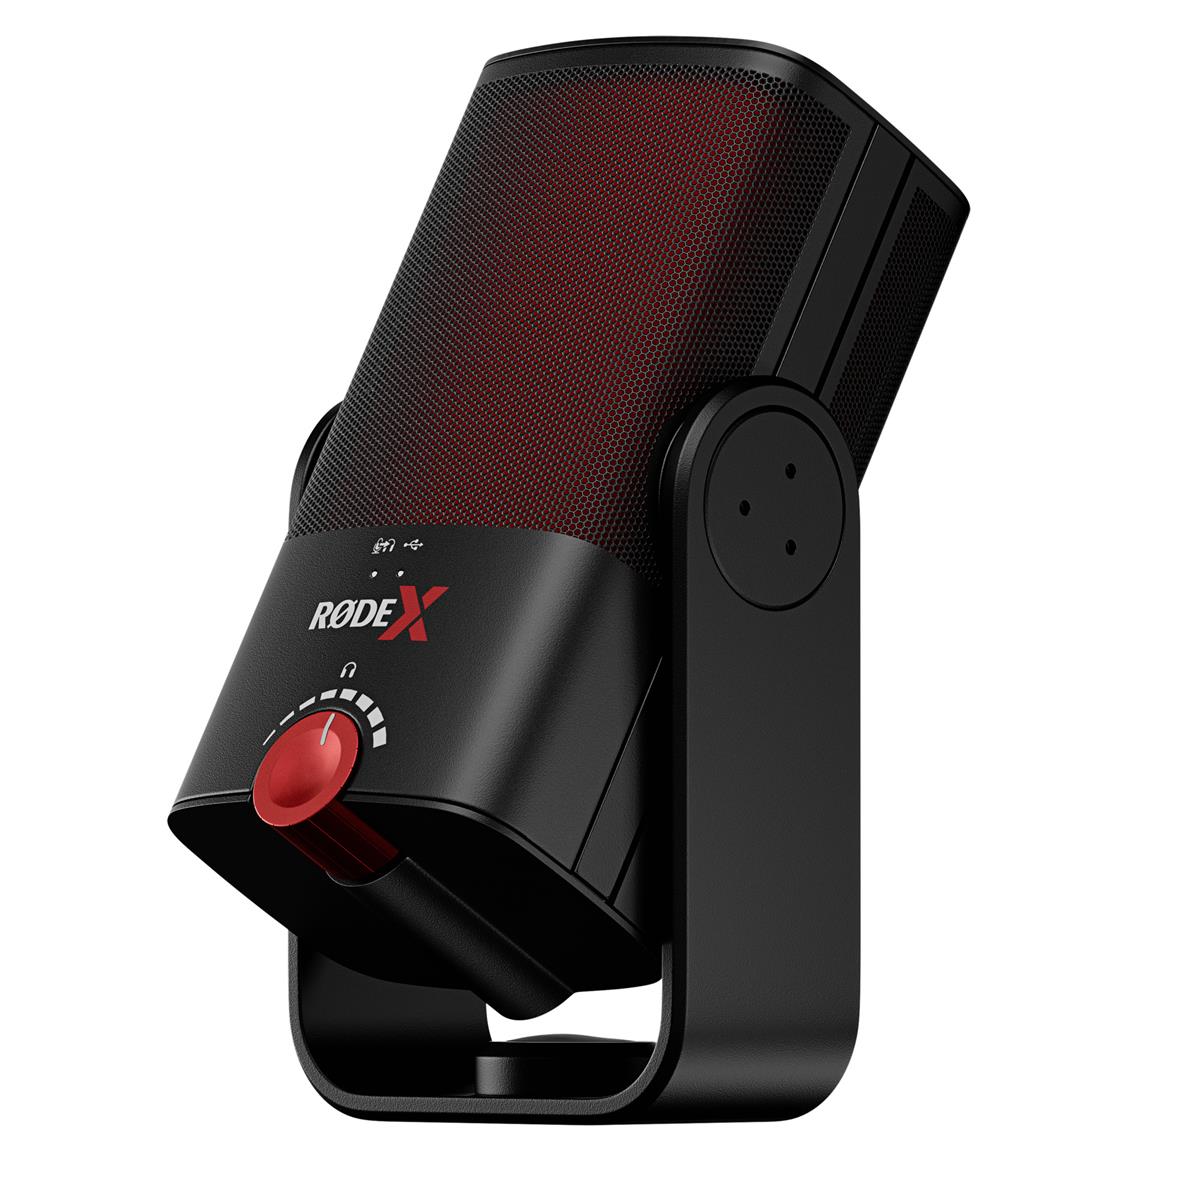 RODE X Rode XCM-50 Professional Cardioid Condenser USB Microphone for Streamers, Gamers -  XCM50